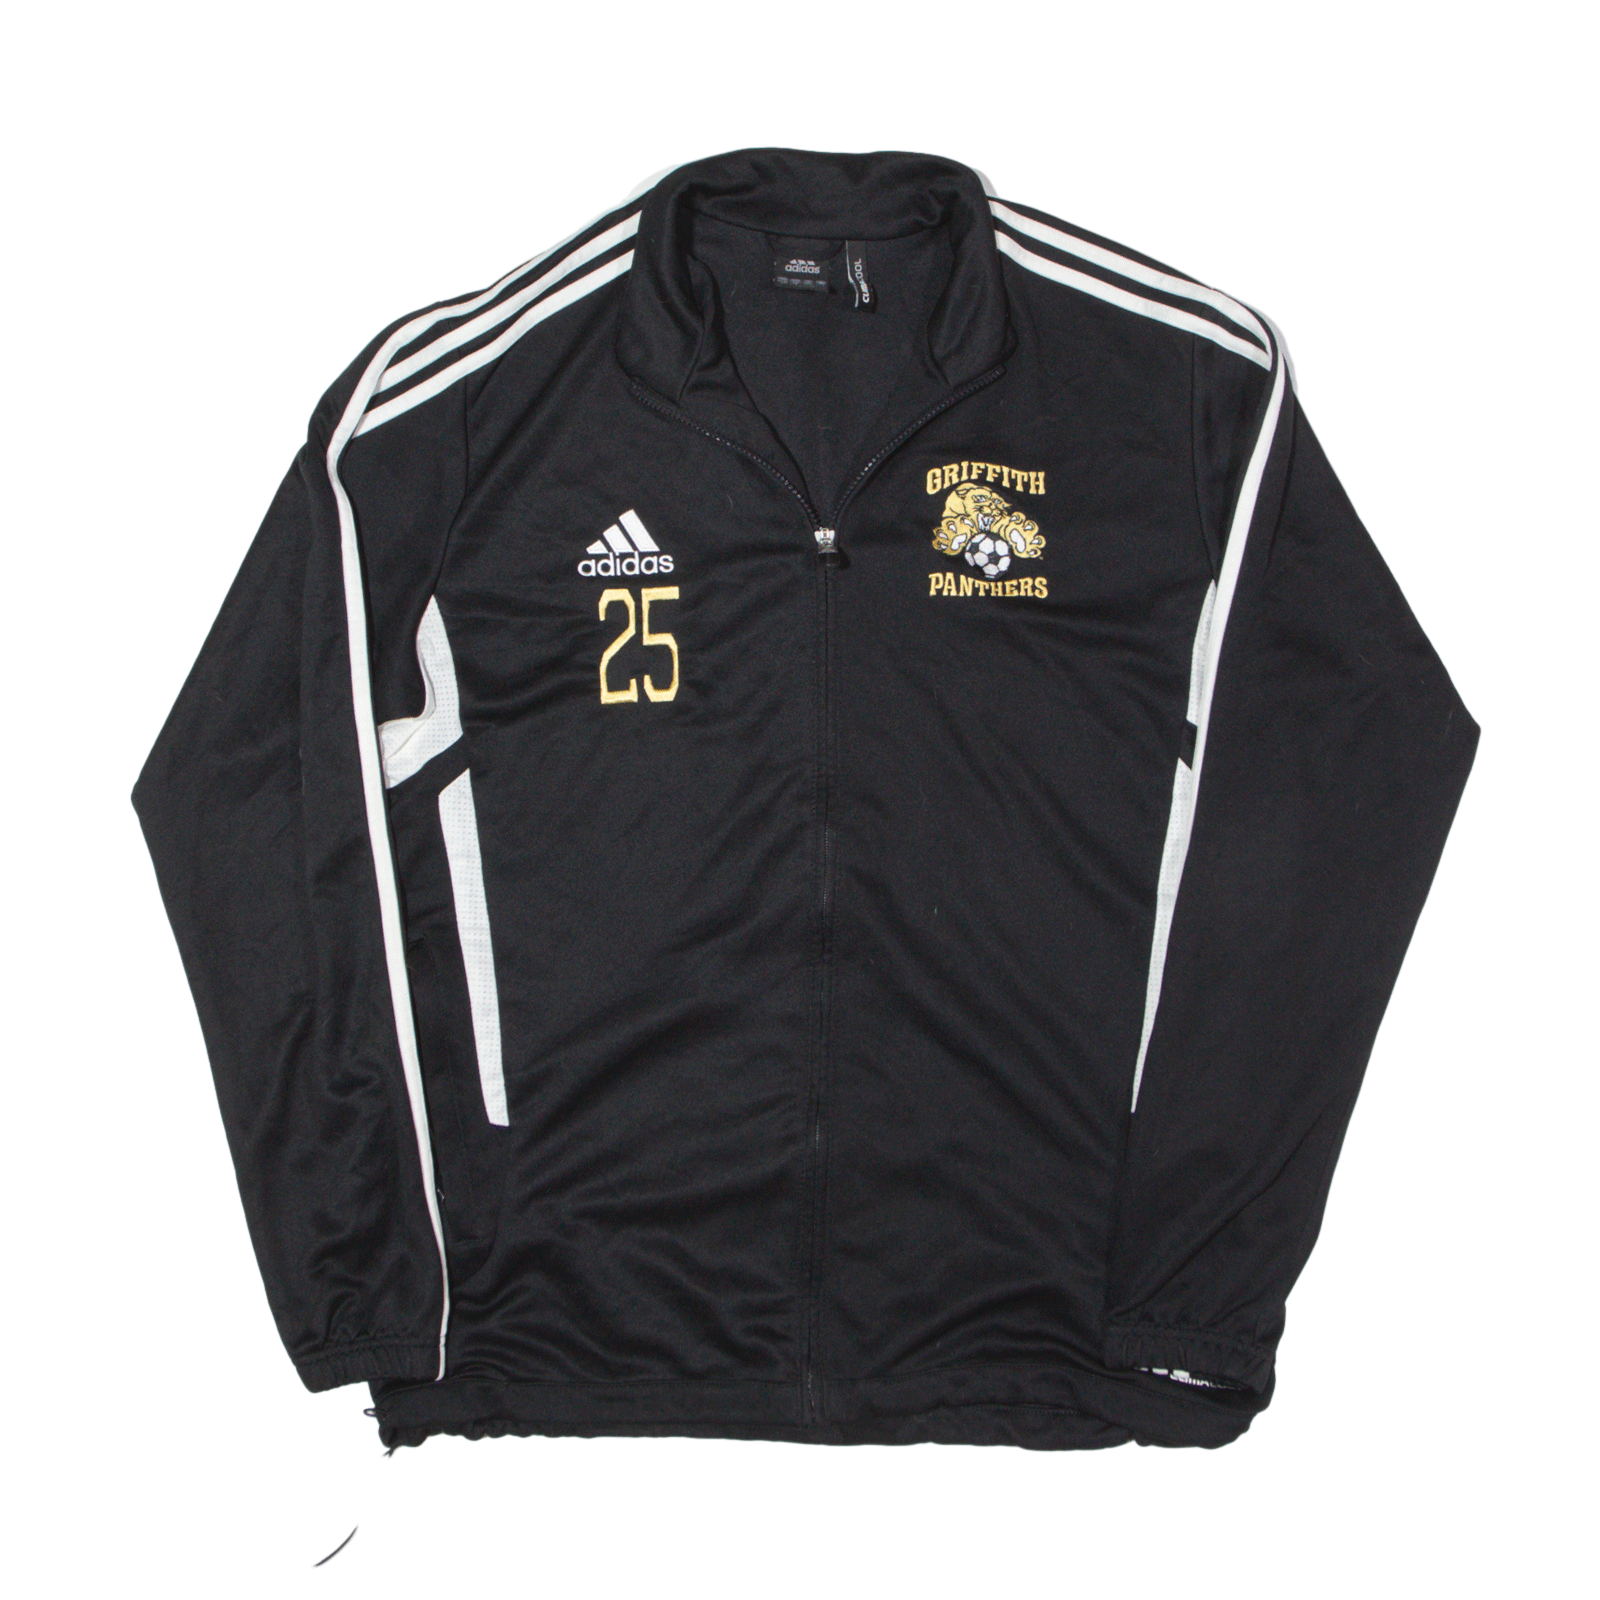 ADIDAS Griffith Panthers Track Jacket Black Mens L – Go Thrift